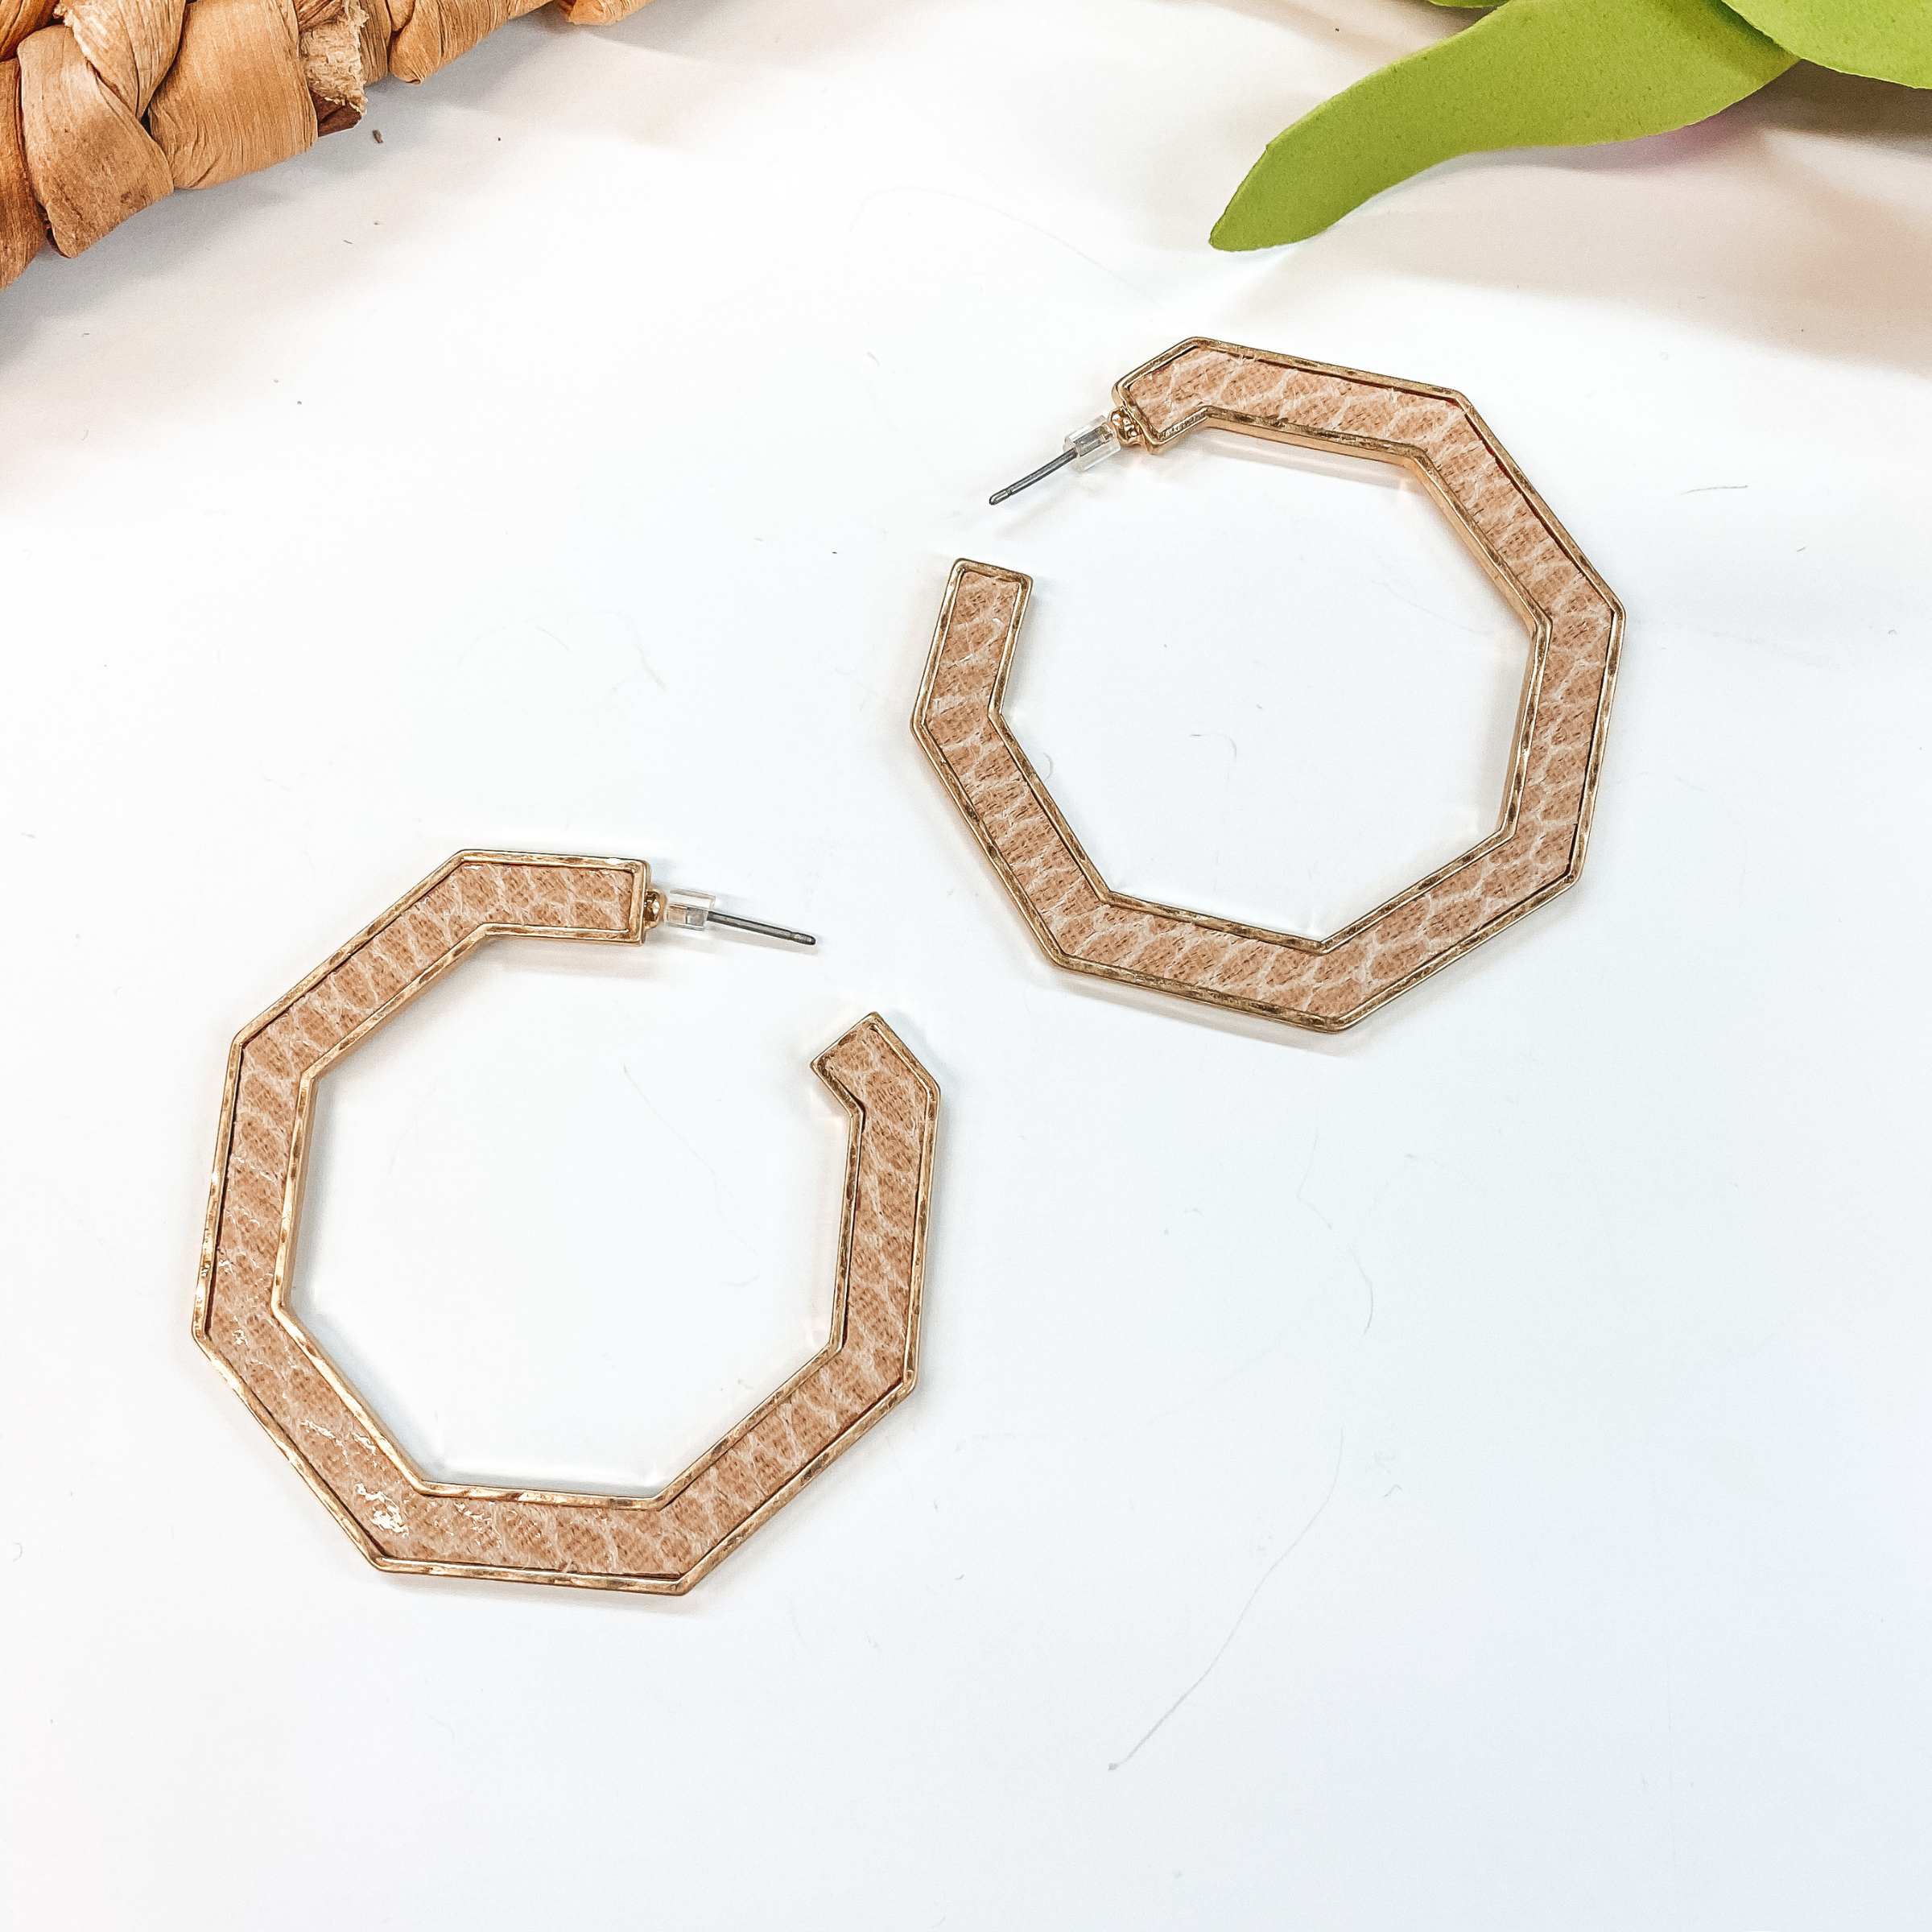 Octagon Hoop Earrings in Tan Snake Print - Giddy Up Glamour Boutique